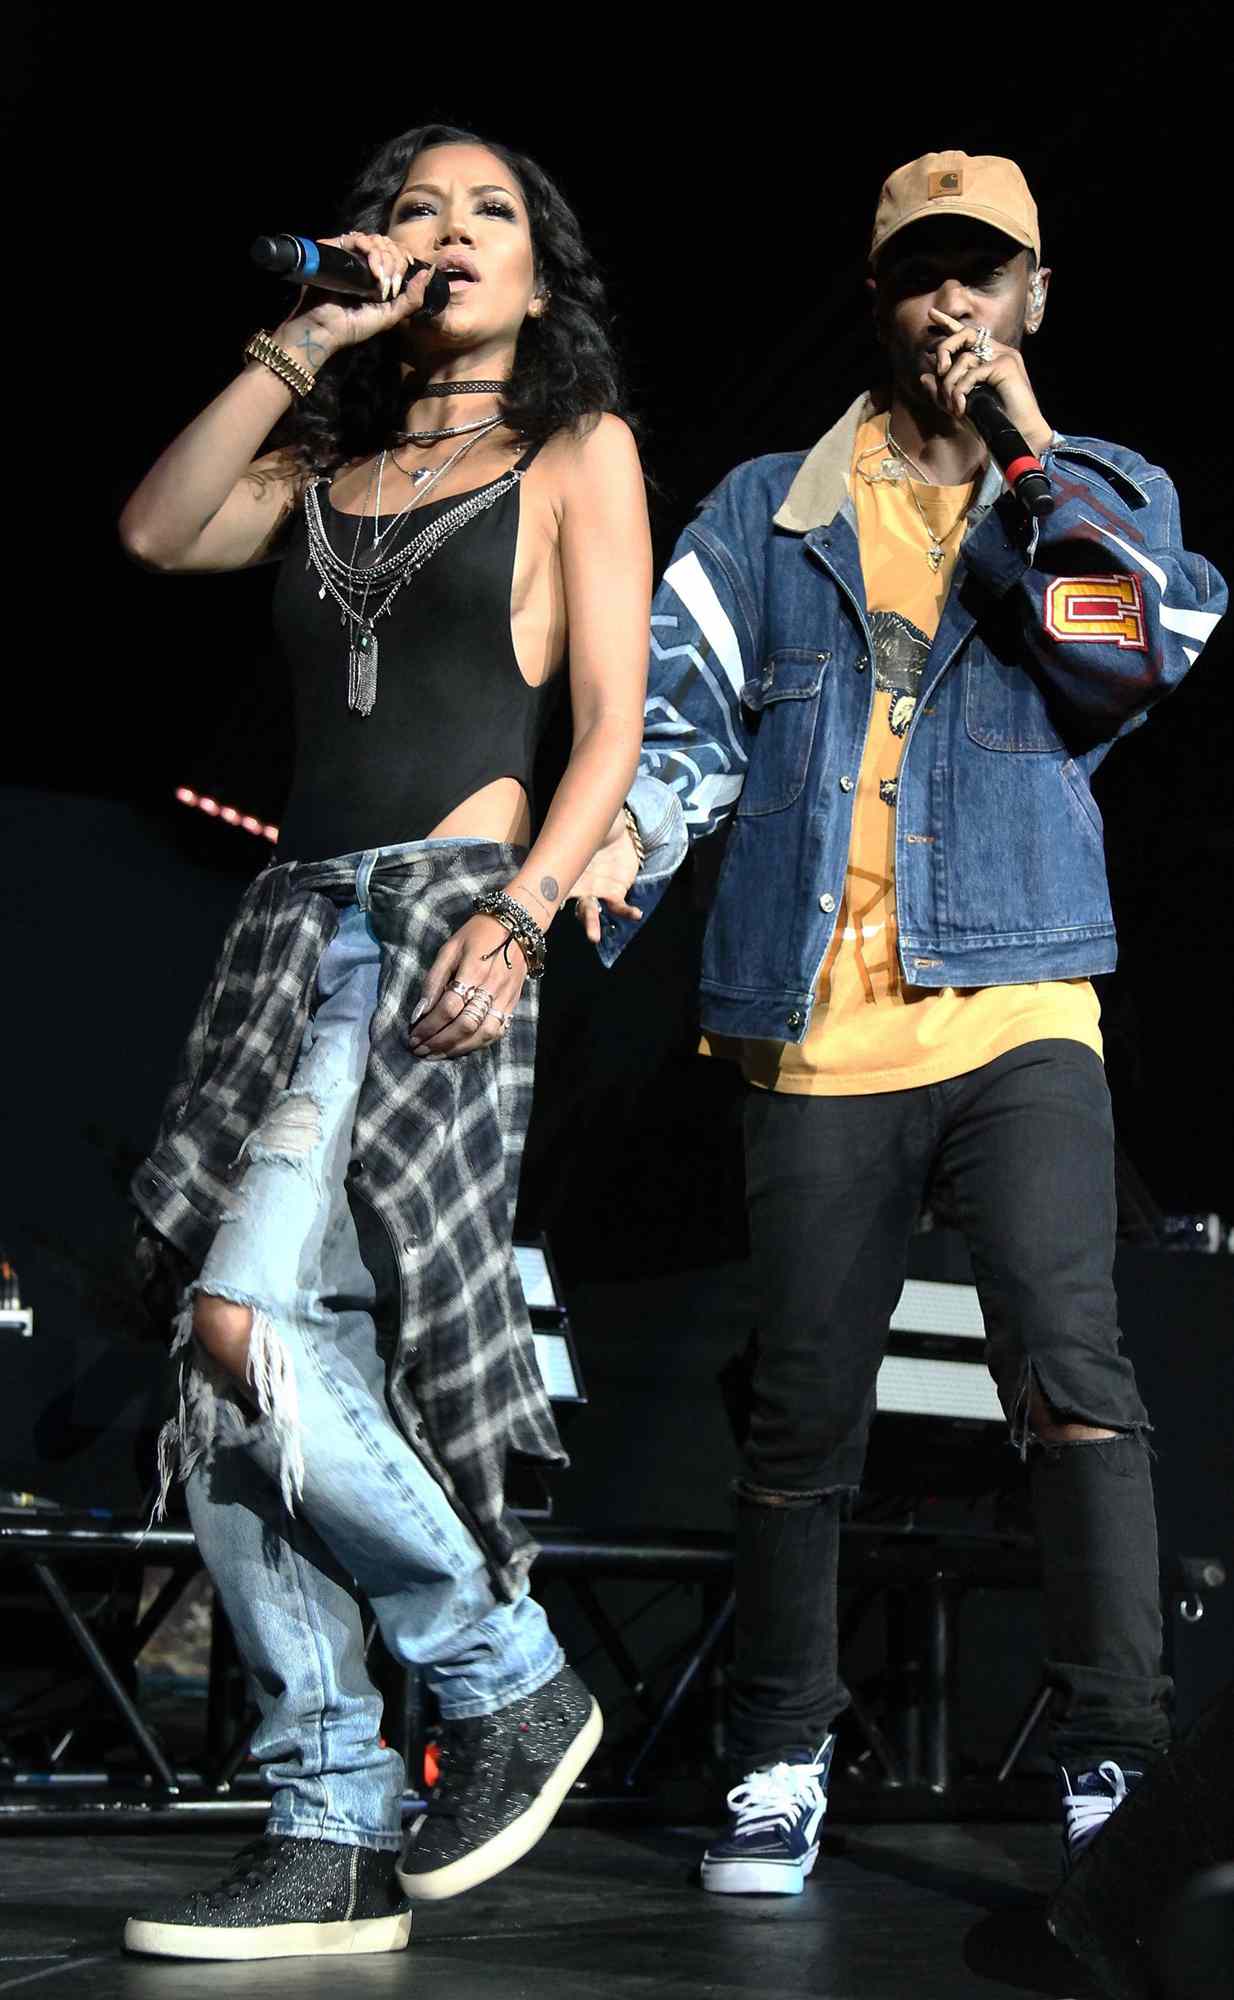 Jhene Aiko and Big Sean perform during the Power 106 Presents Powerhouse at Honda Center on June 3, 2016 in Anaheim, Califórnia